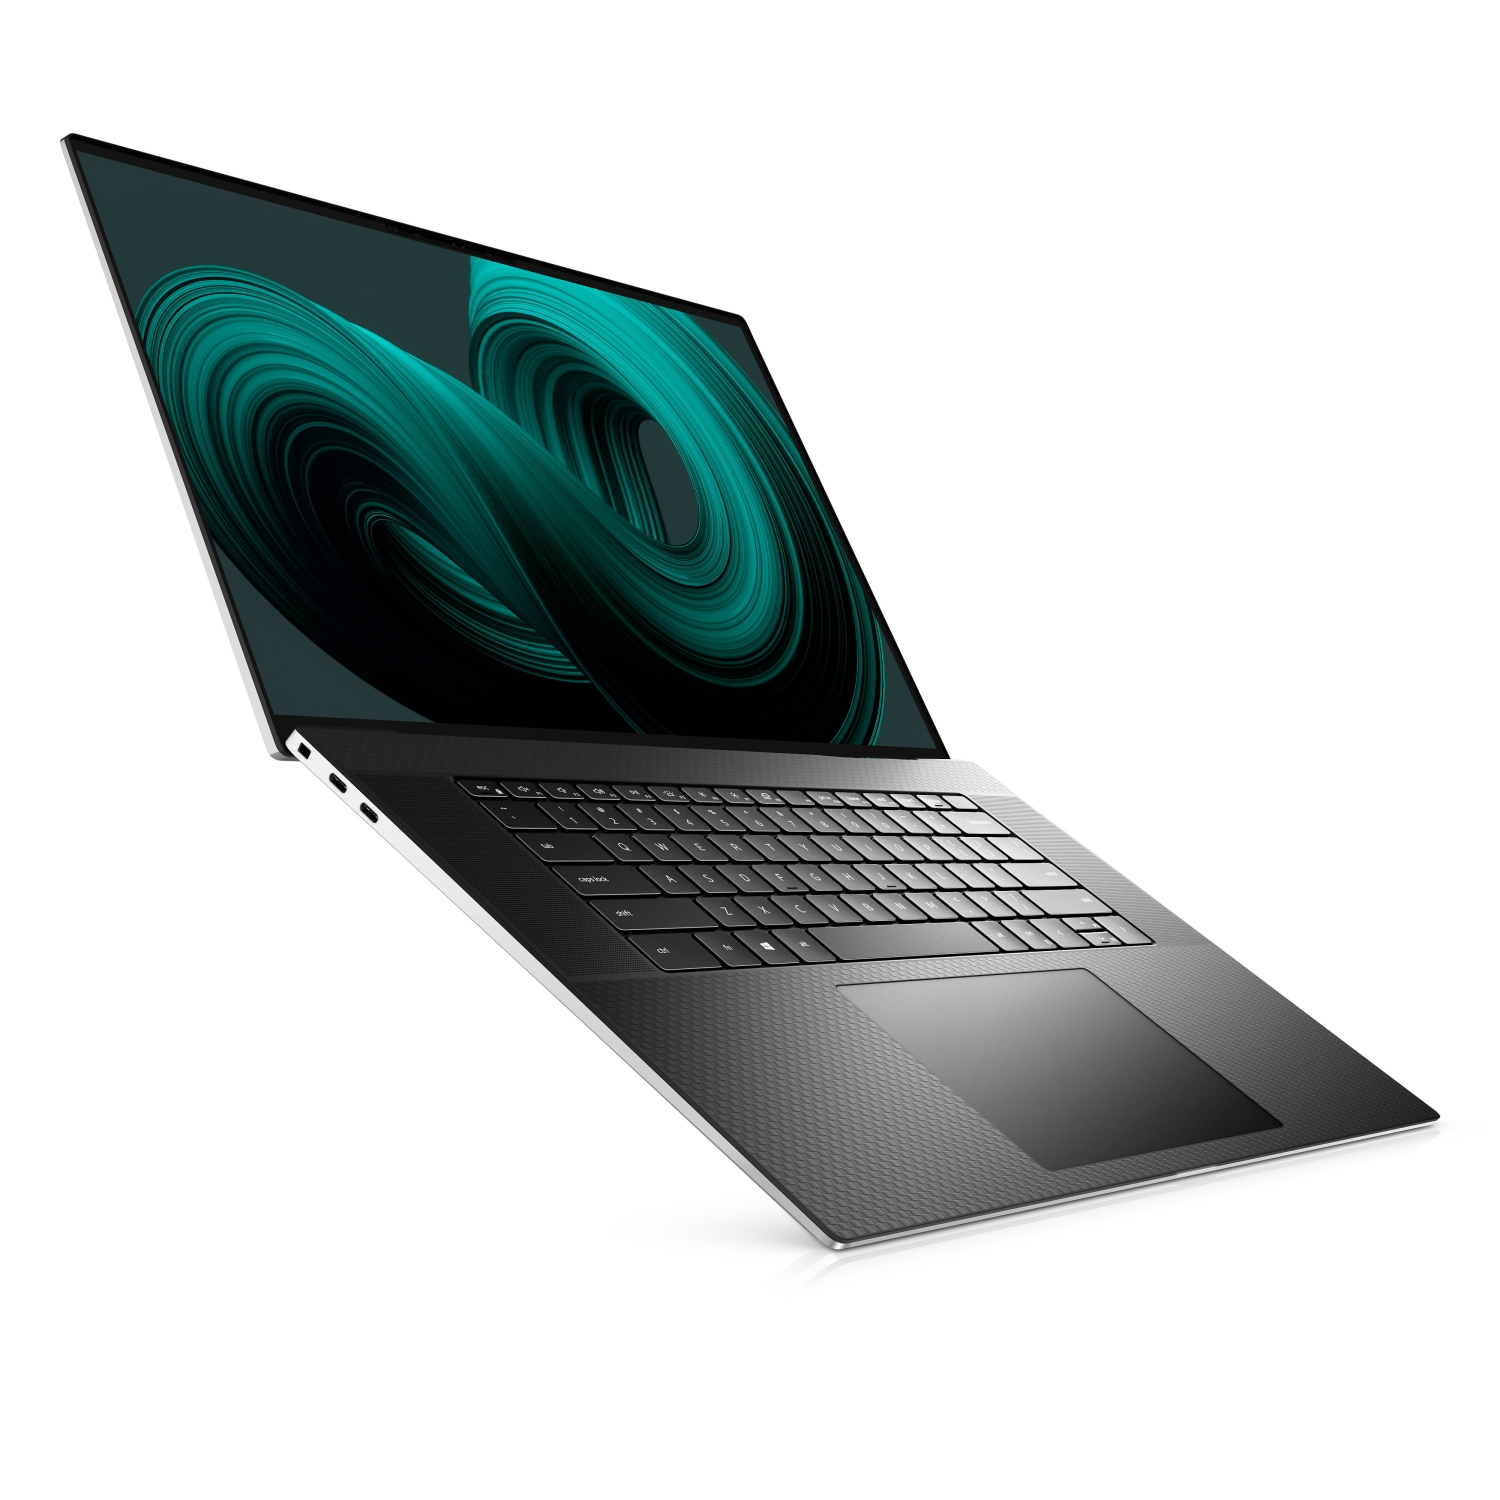 Refurbished (Excellent) - Dell XPS 17 9710 Laptop (2021) | 17" 4K Touch | Core i9 - 512GB SSD - 32GB RAM - RTX 3060 | 8 Cores @ 5 GHz - 11th Gen CPU Certified Refurbished